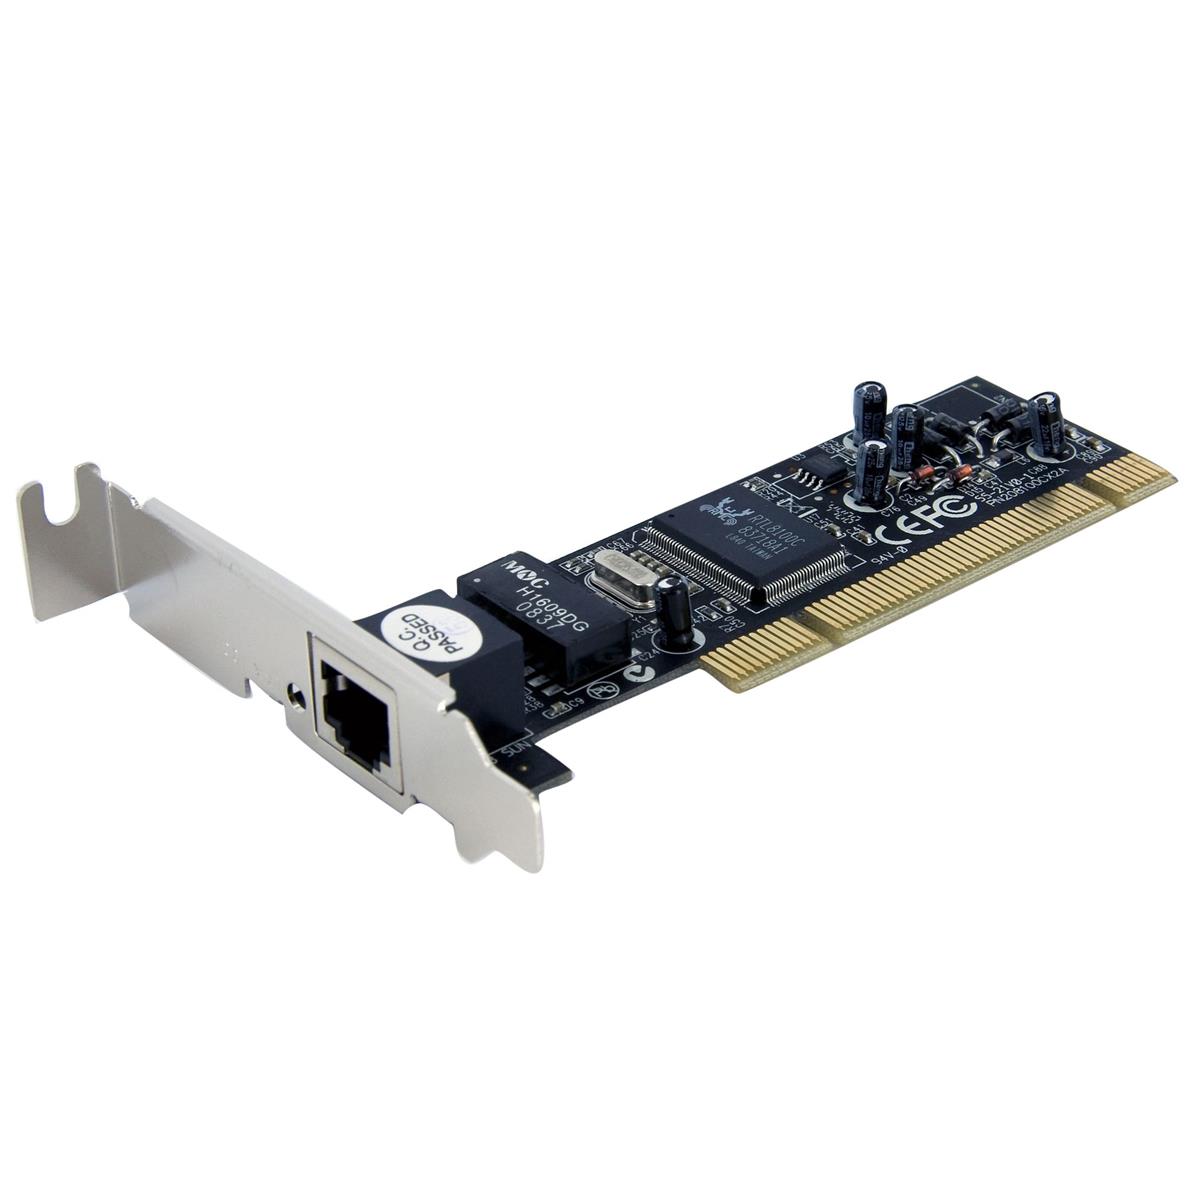 Image of StarTech Low Profile PCI 10/100 Mbps Ethernet Network Adapter Card